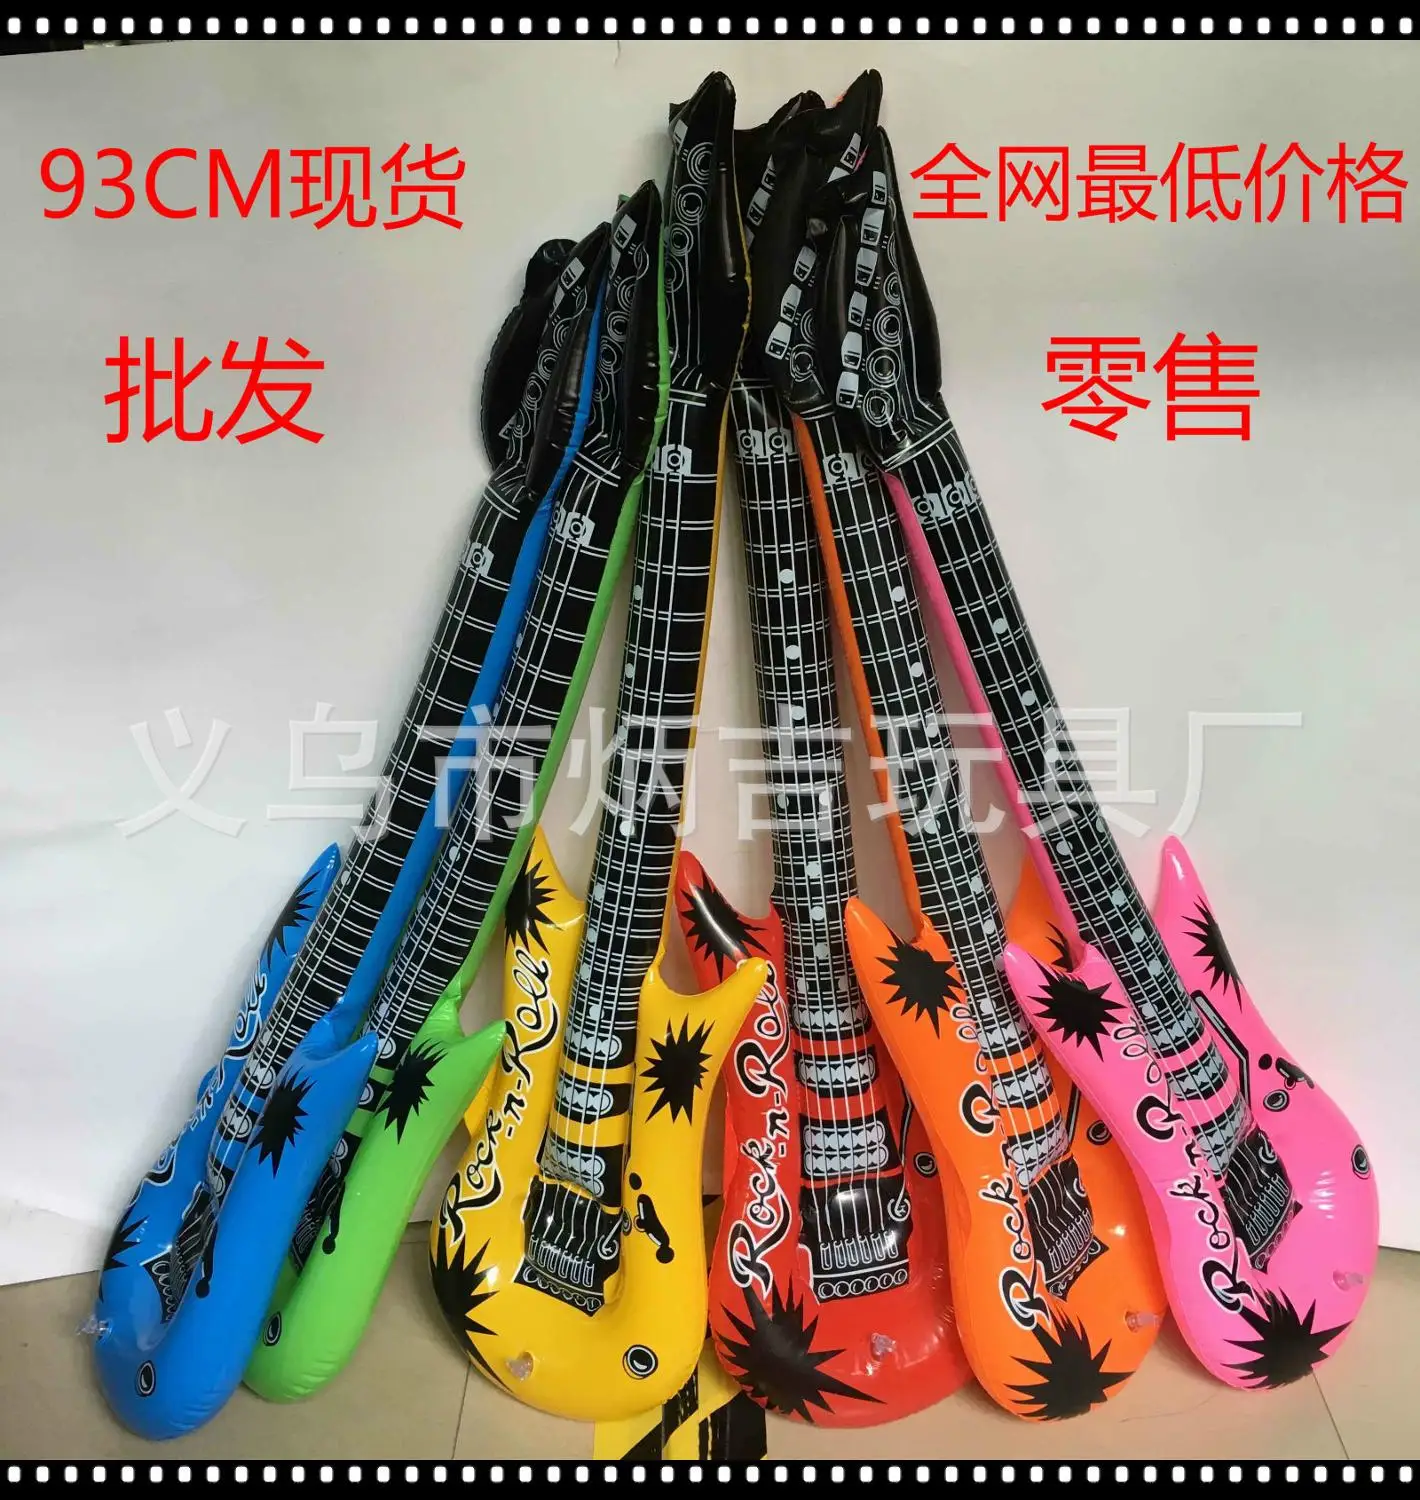 2 x Inflatable Blow Up Guitar Fancy Dress Party Prop Musical Disco Rock 